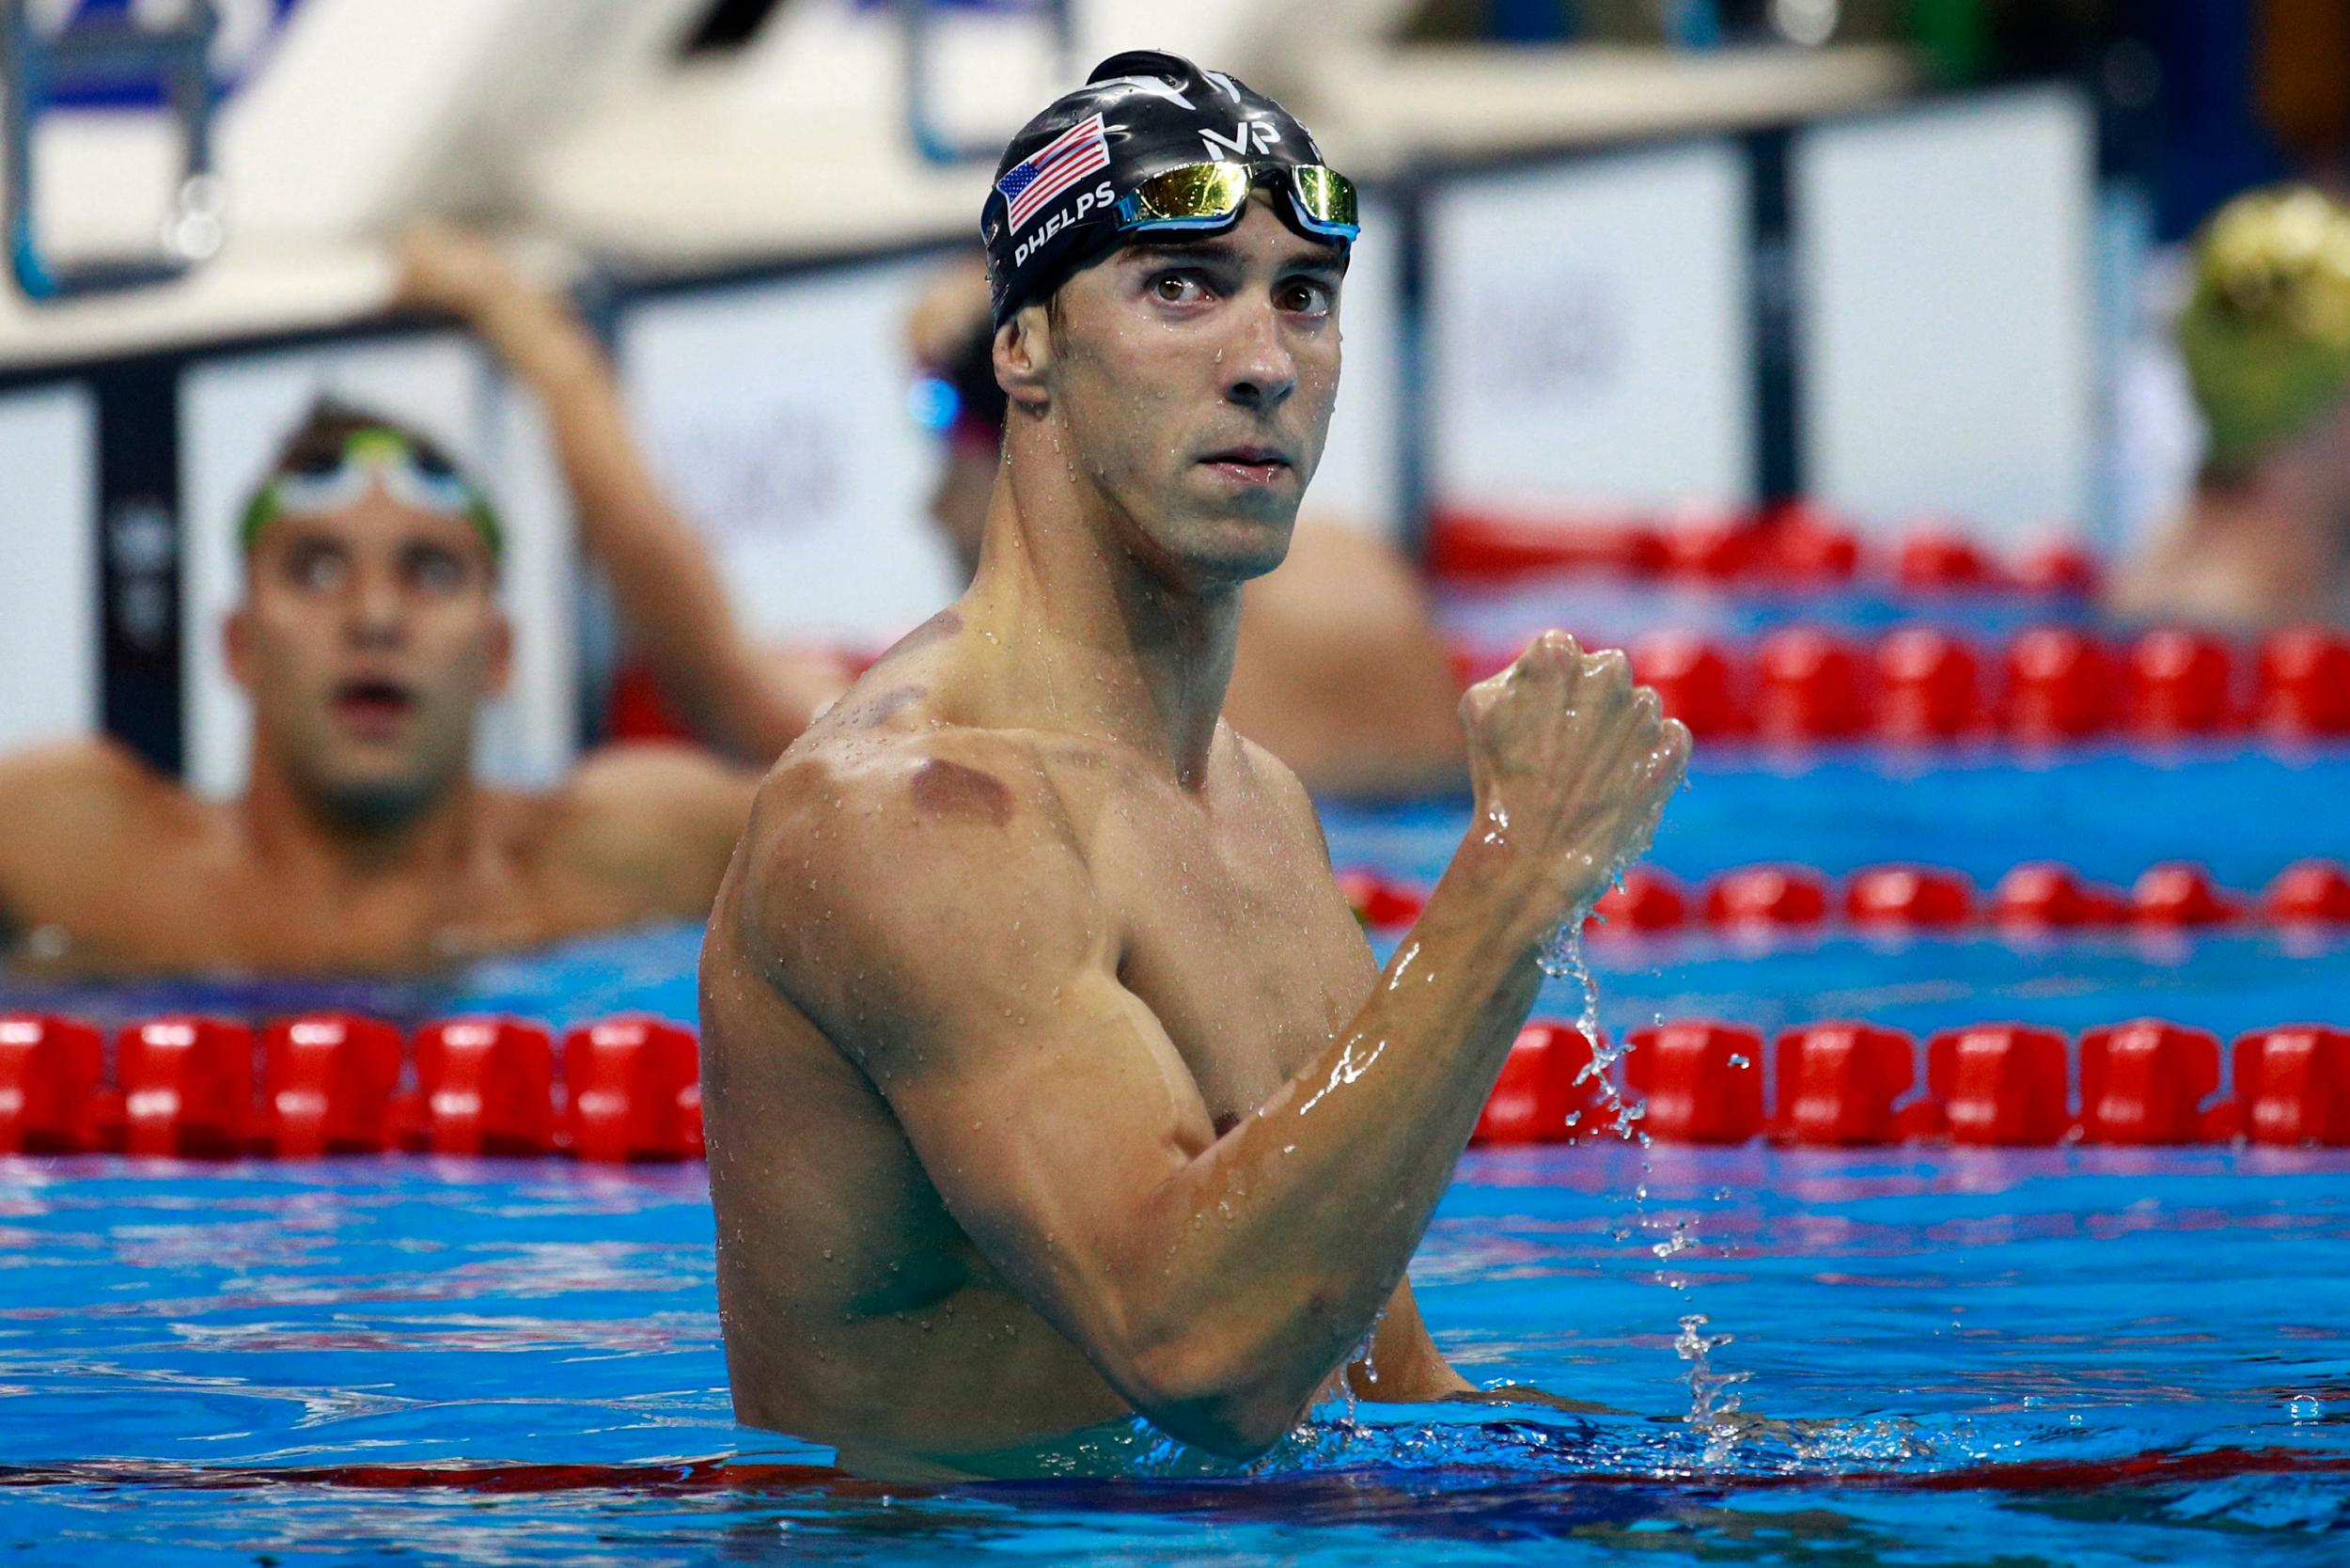 Michael Phelps described the comedown after an Olympic gold medal as a "darkness"